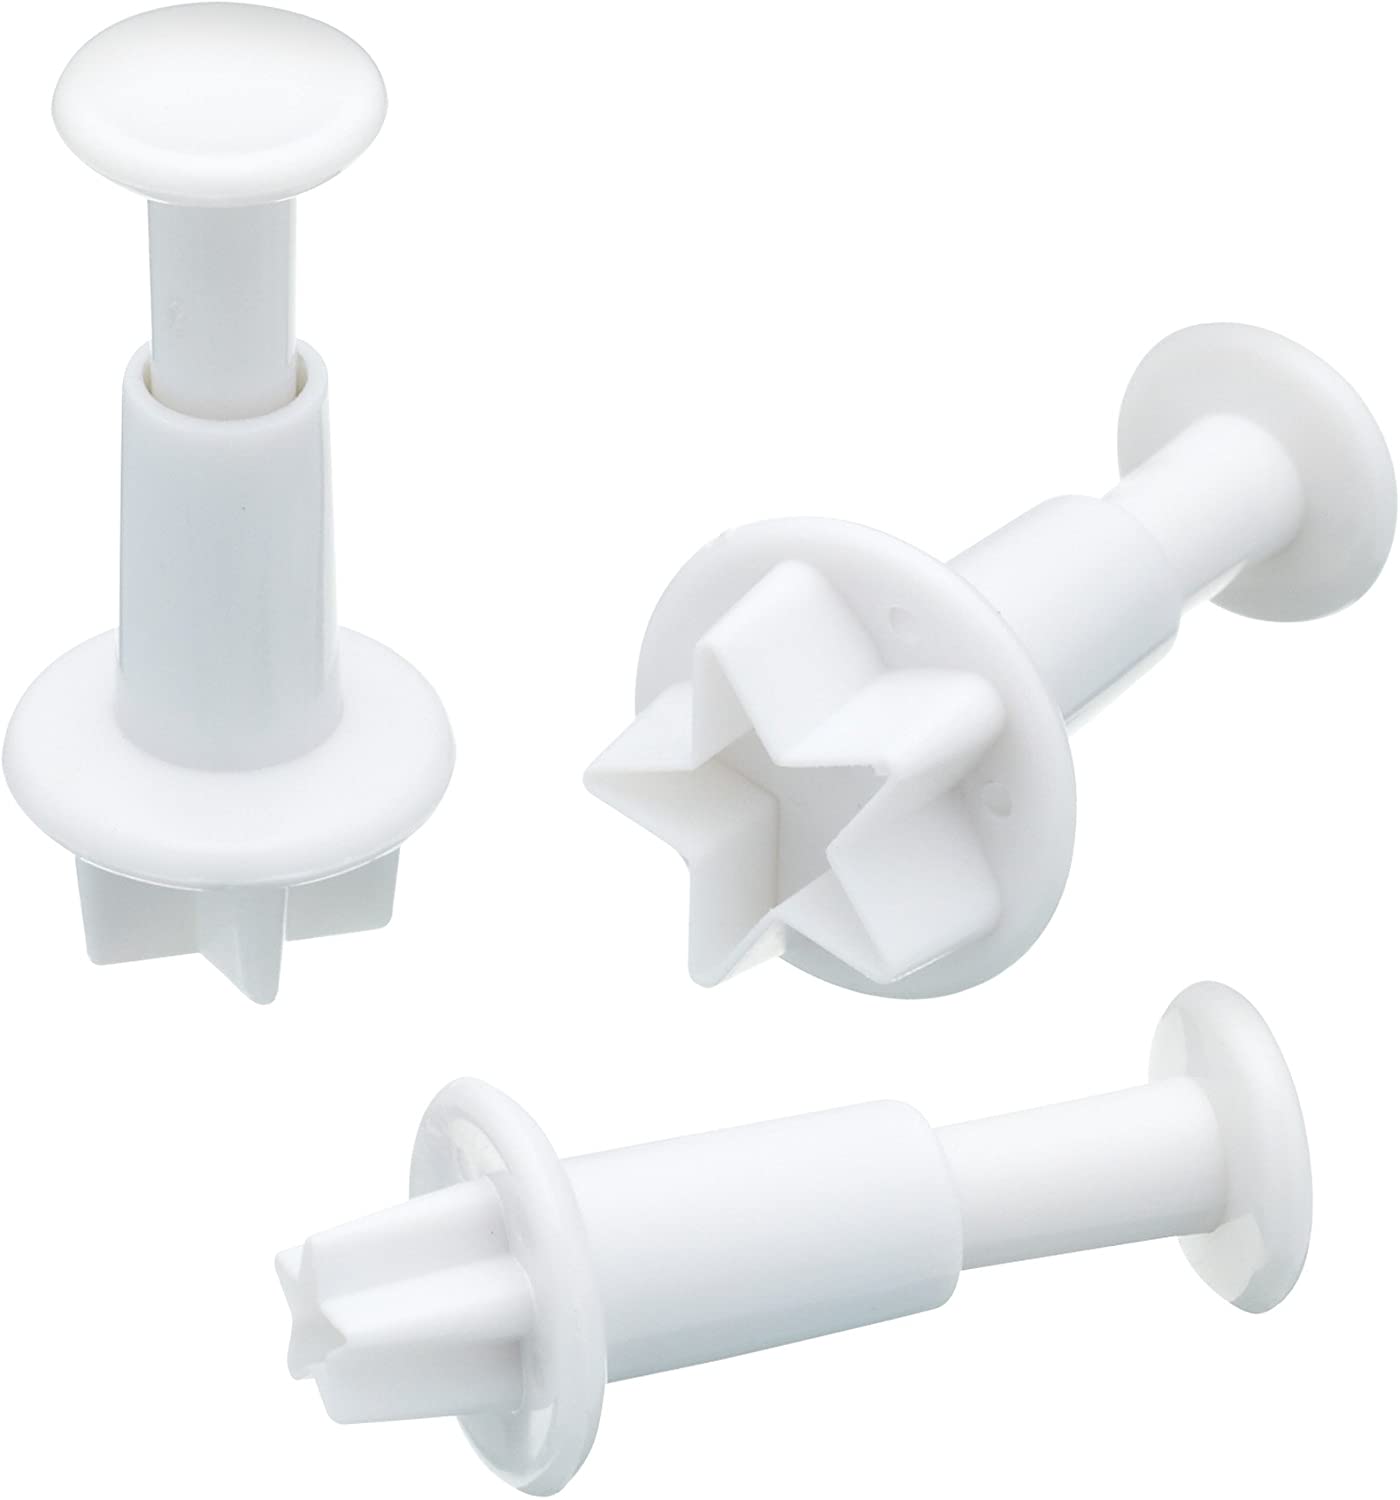 Kitchen Craft Sweetly Does It Star Fondant Plunger Cutters, Set of 3